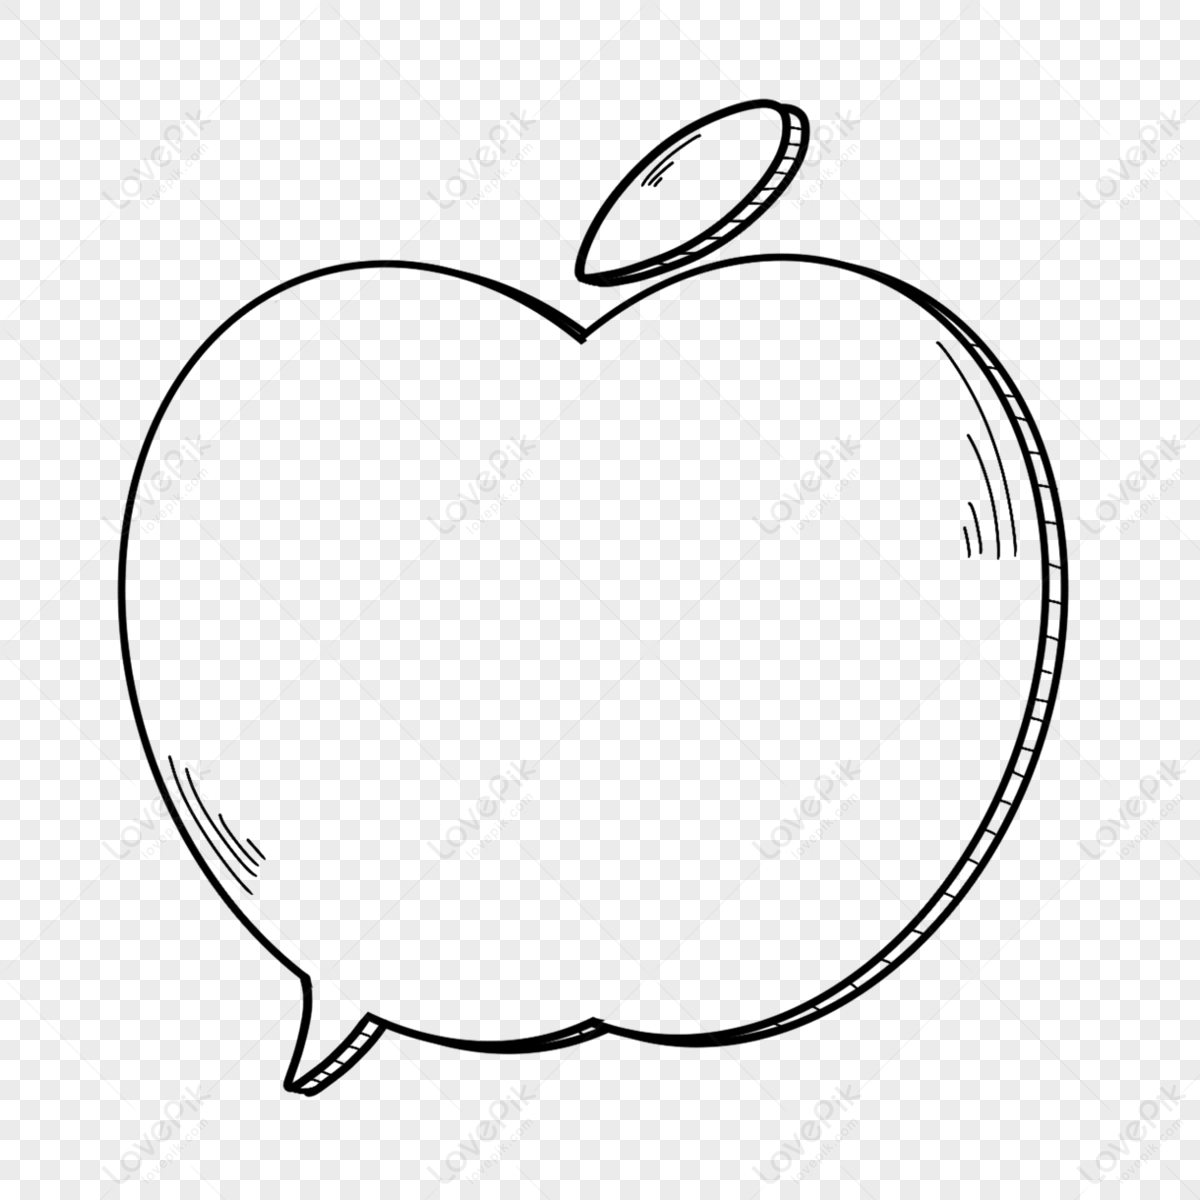 Apple Fruit Hand Drawn Outline Doodle Stock Vector (Royalty Free)  1044230602 | Shutterstock